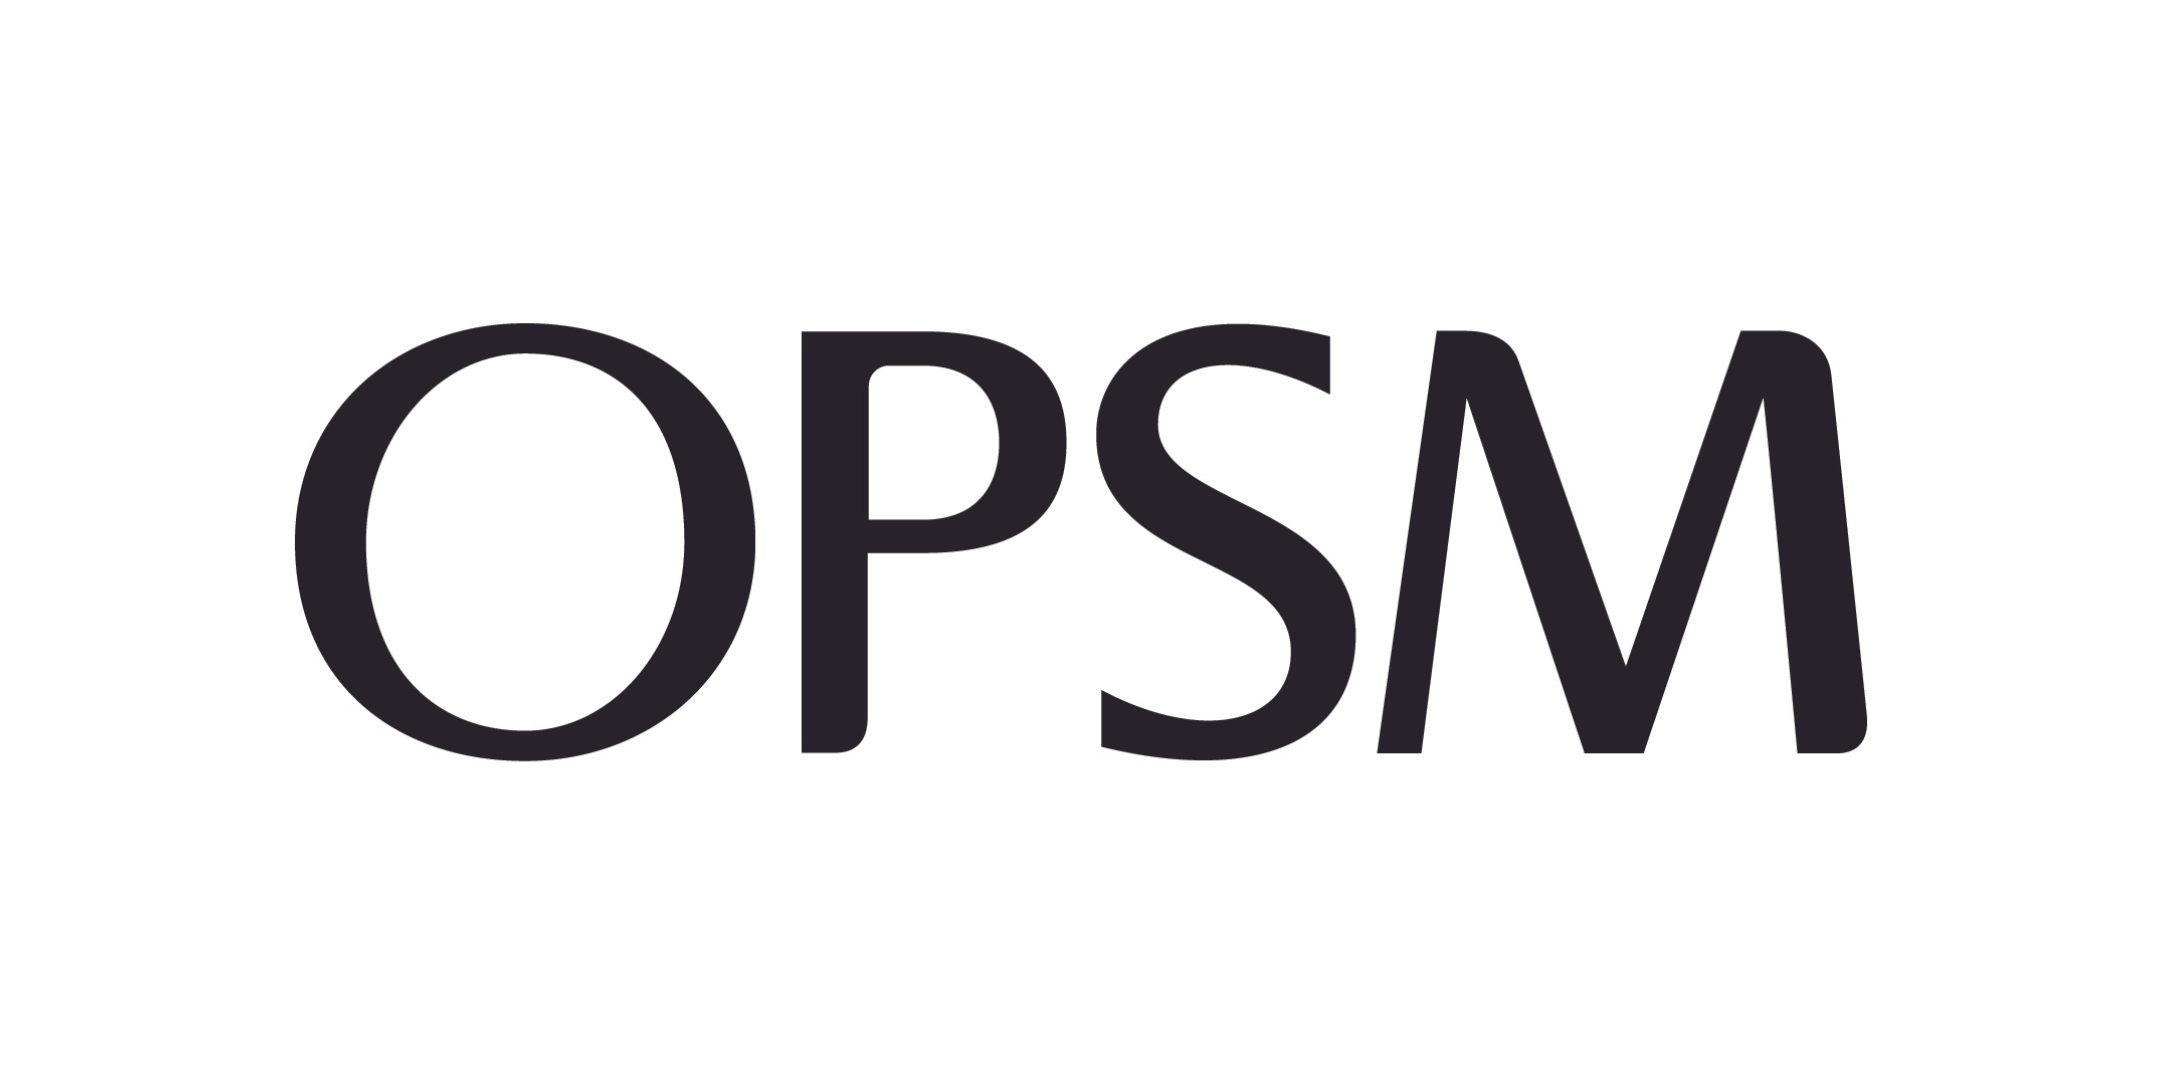 OPSM